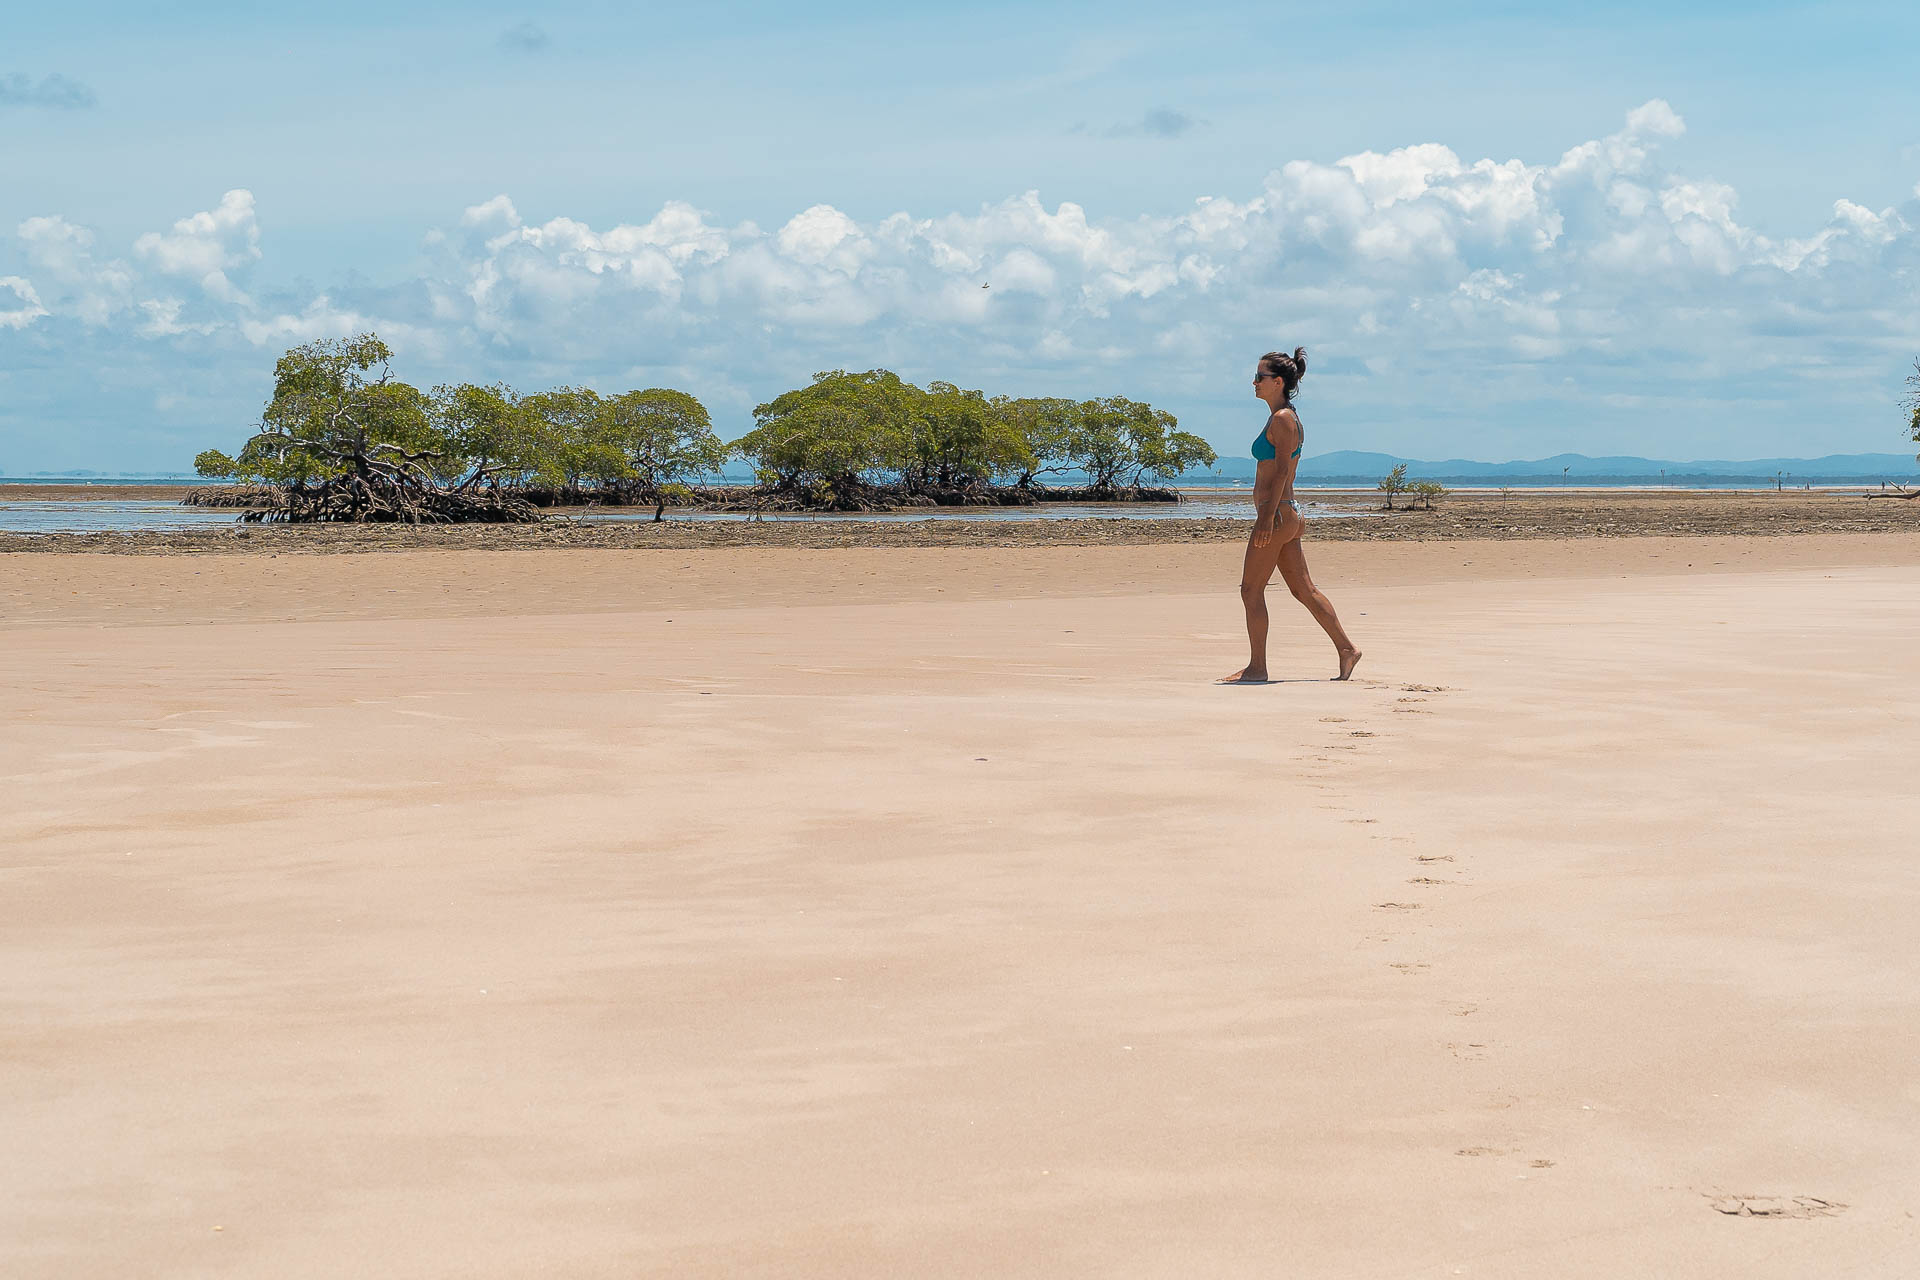 Fernanda walking on the white sandy beach with a lot of space and nothing around